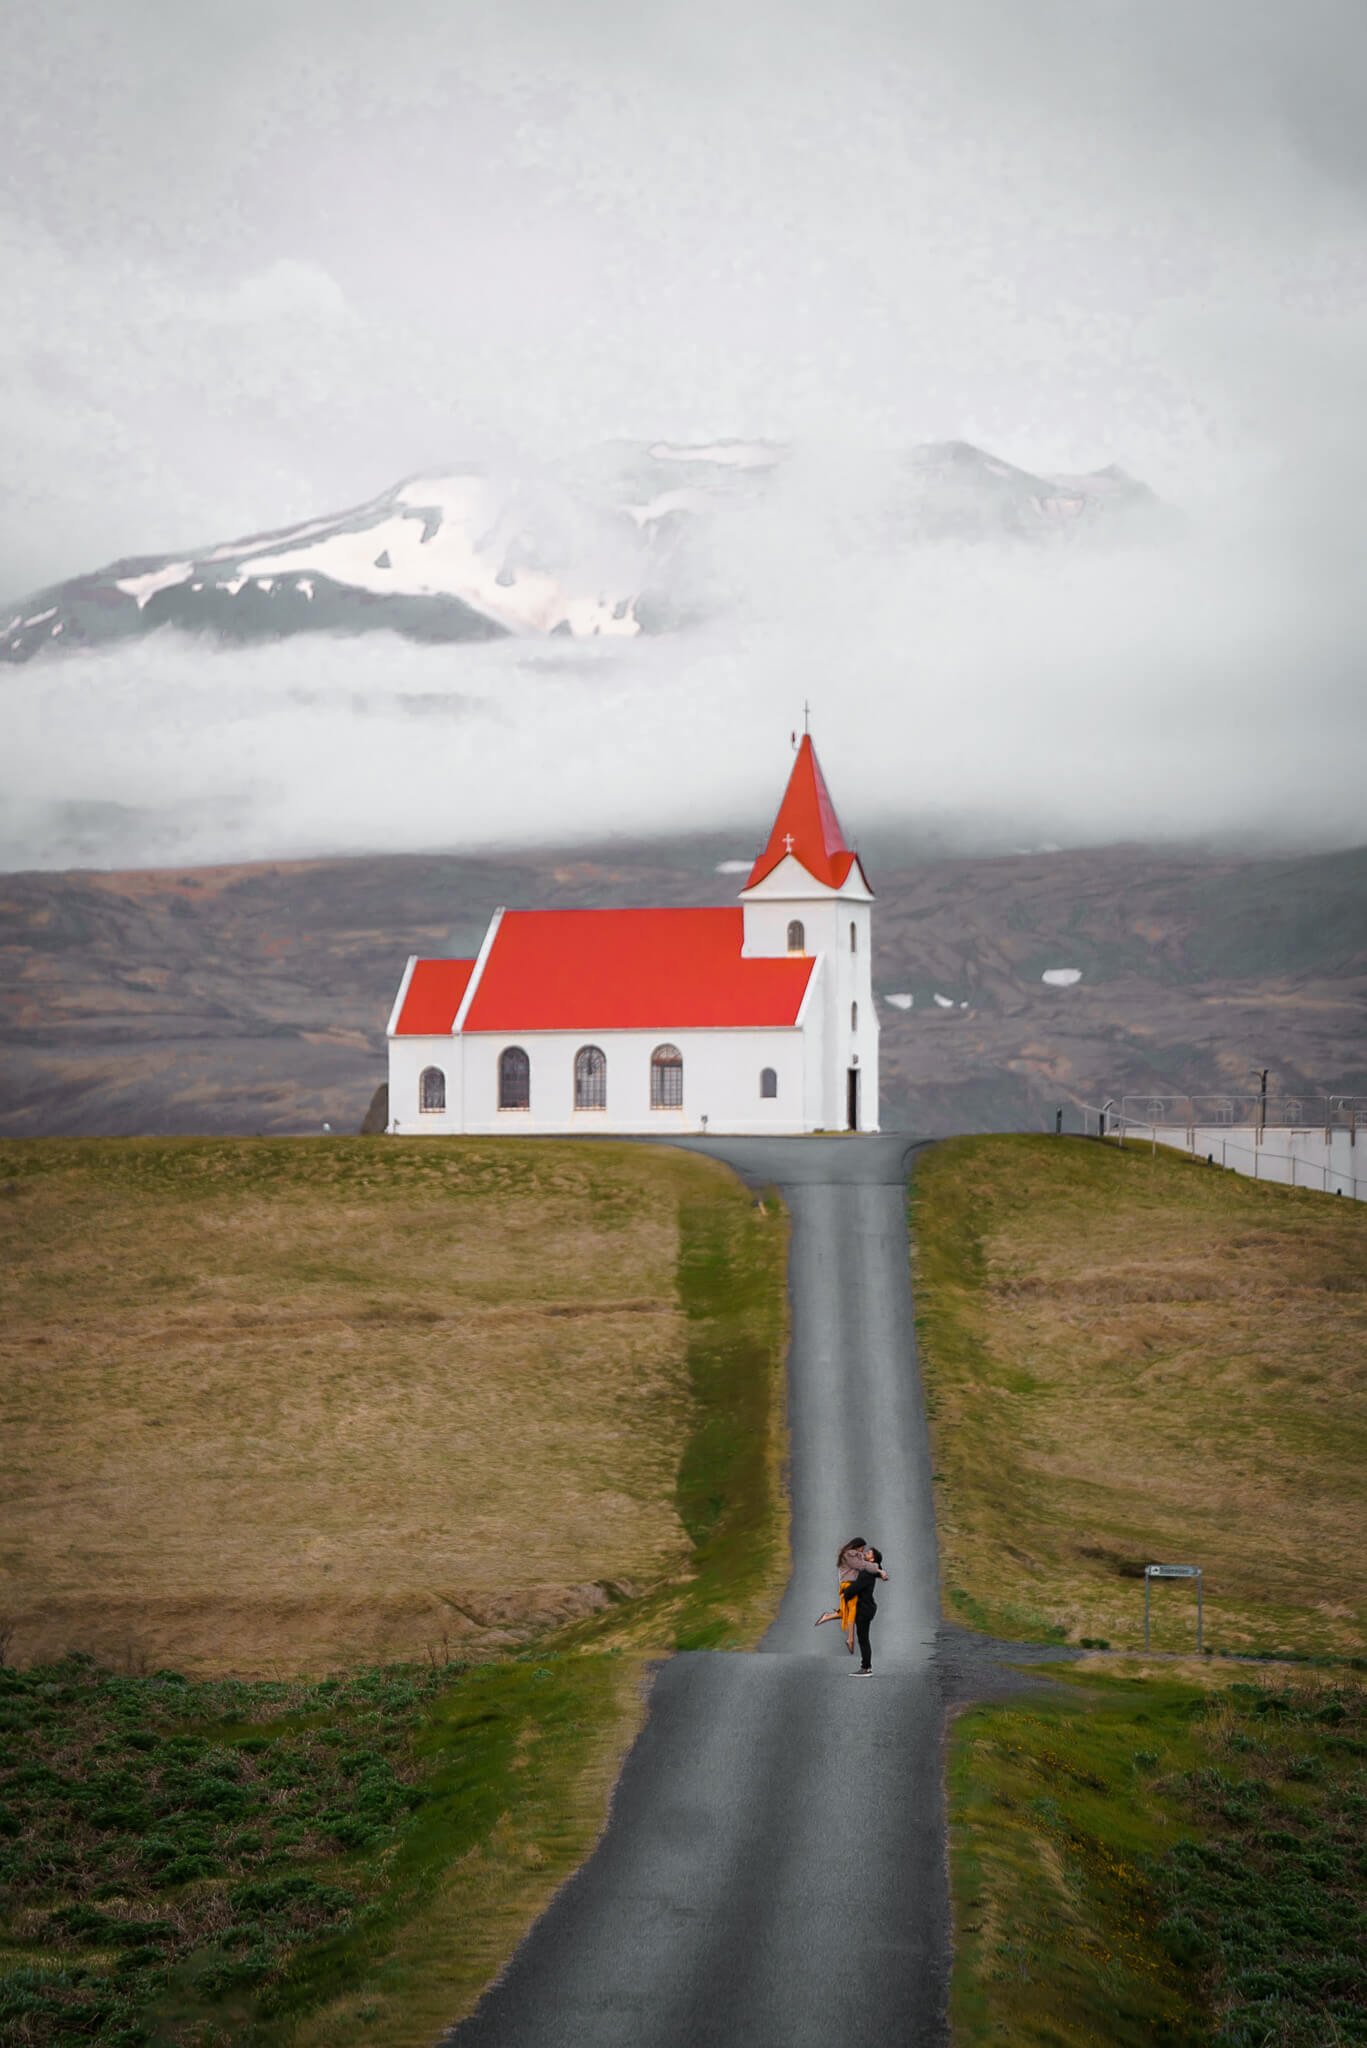 Iceland travel guide